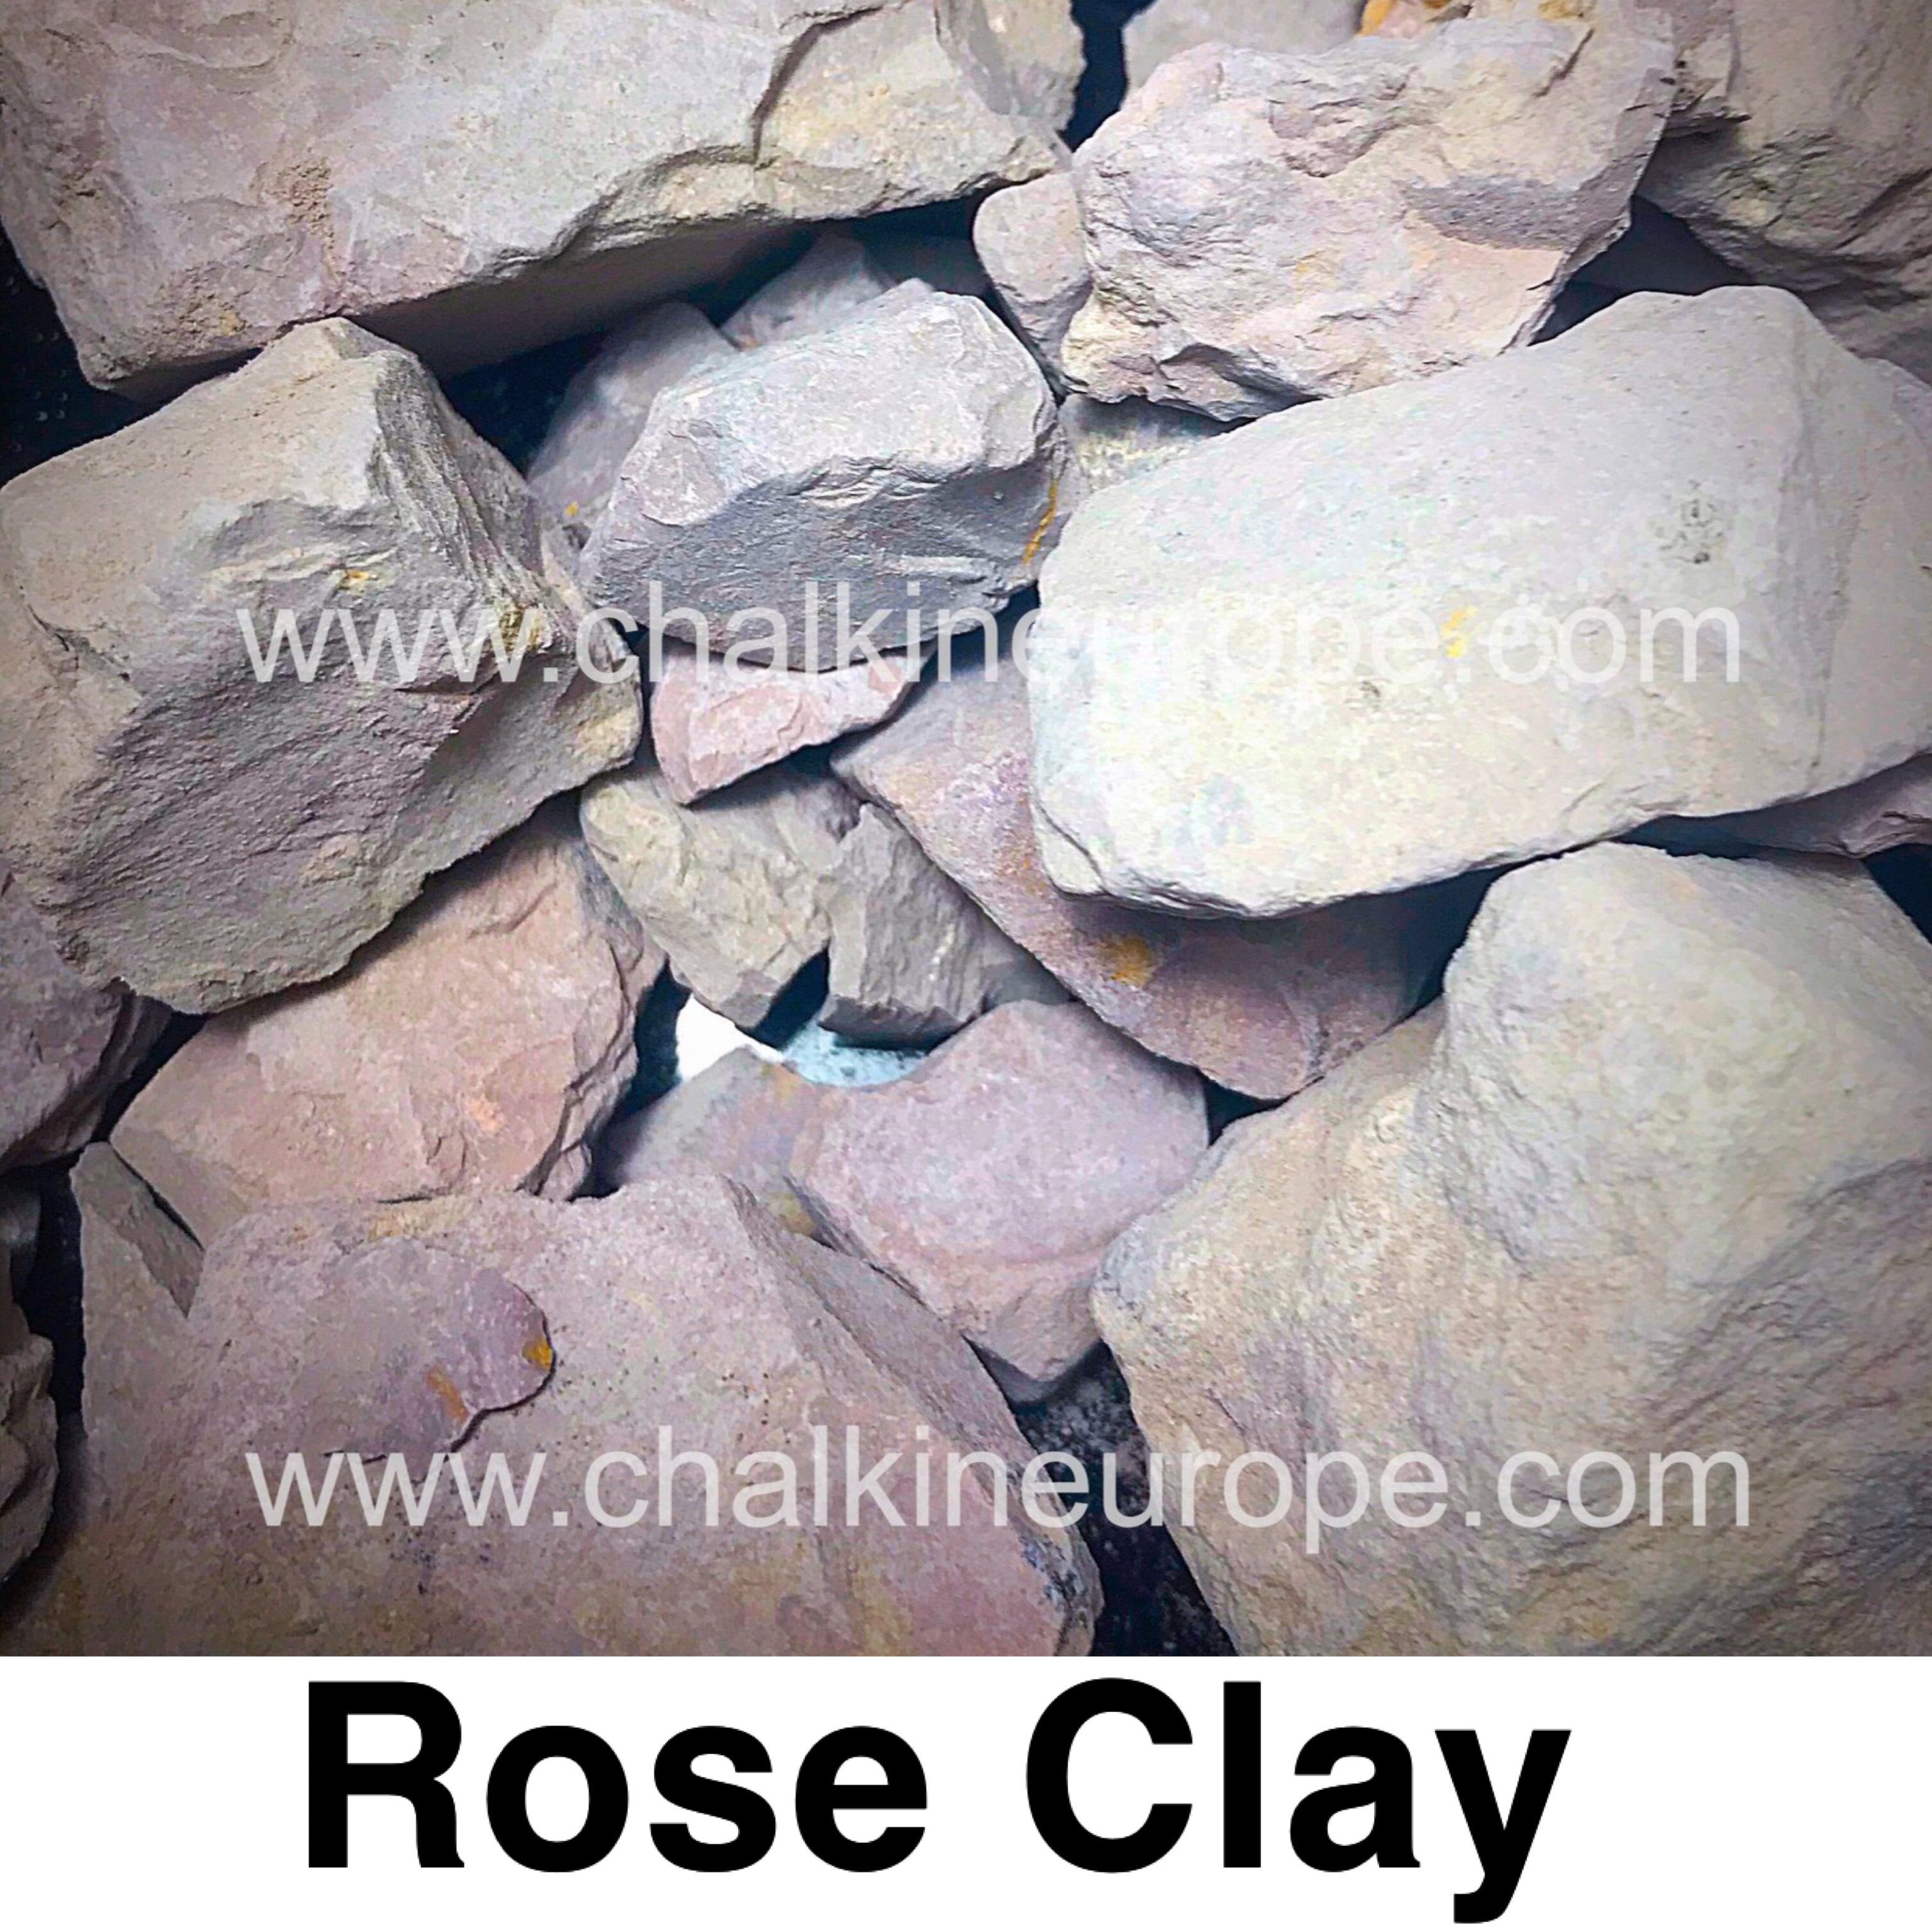 Rose Clay - Chalkineurope